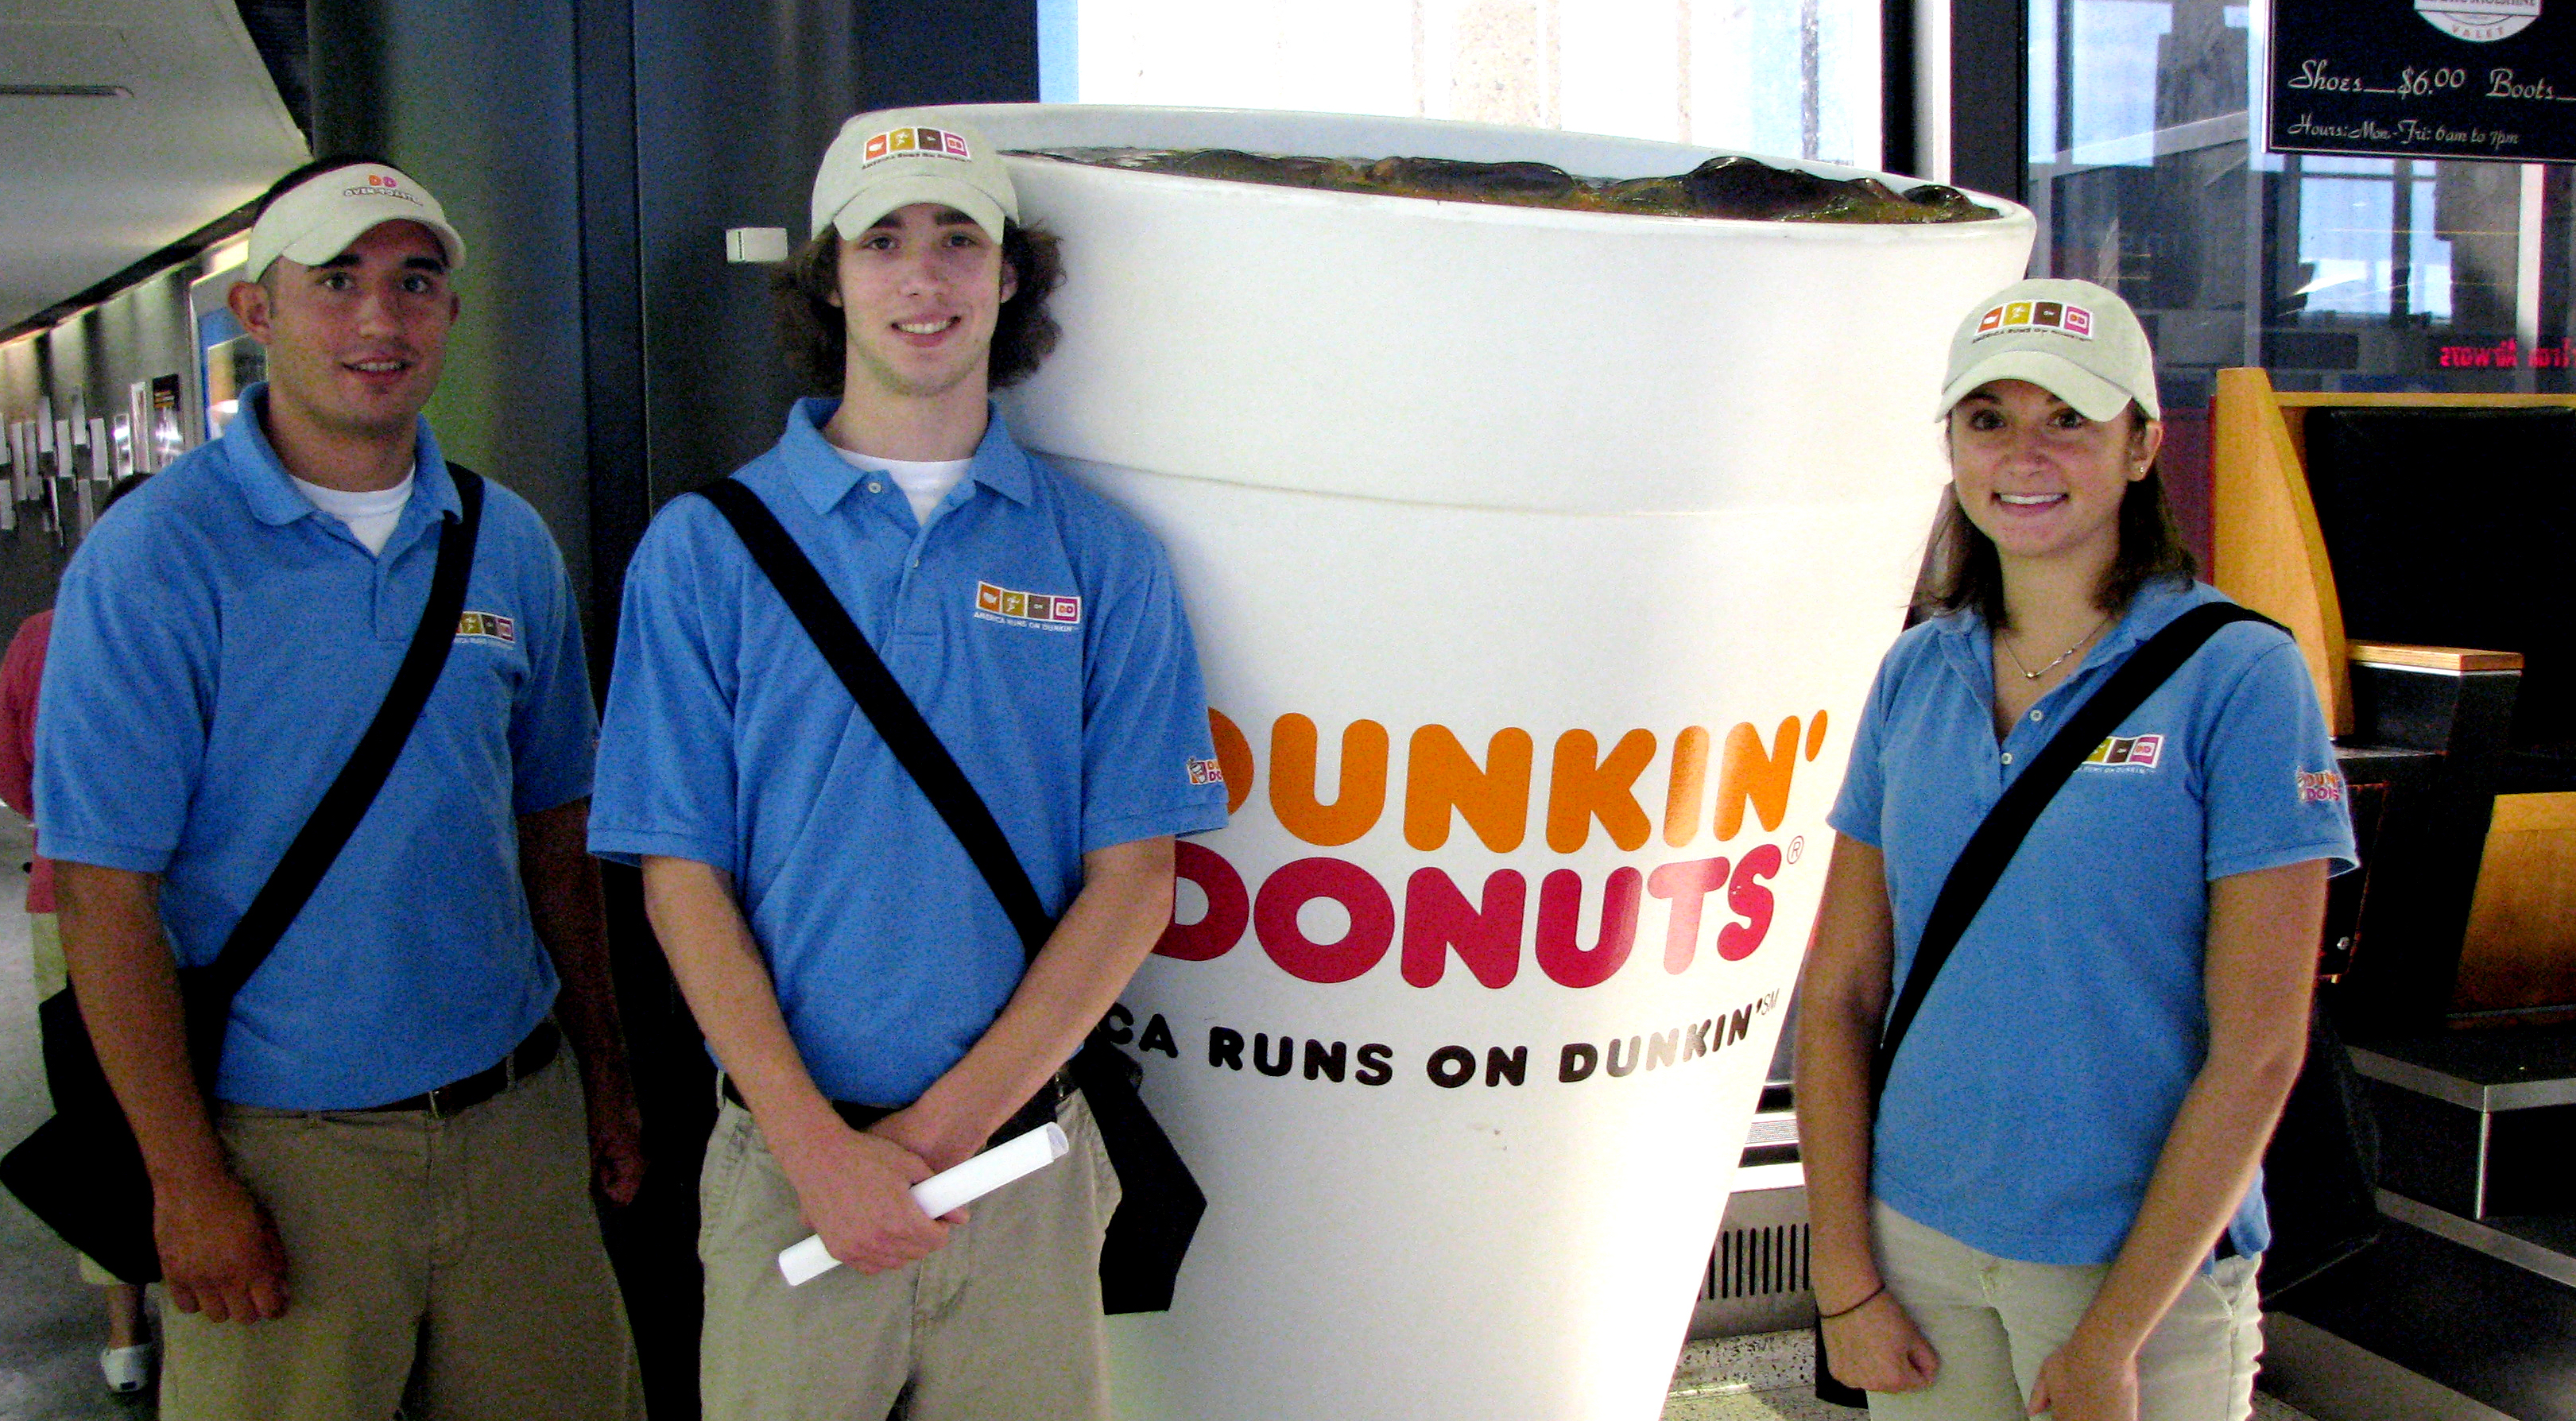 Airport Sponsorship with Dunkin Donuts